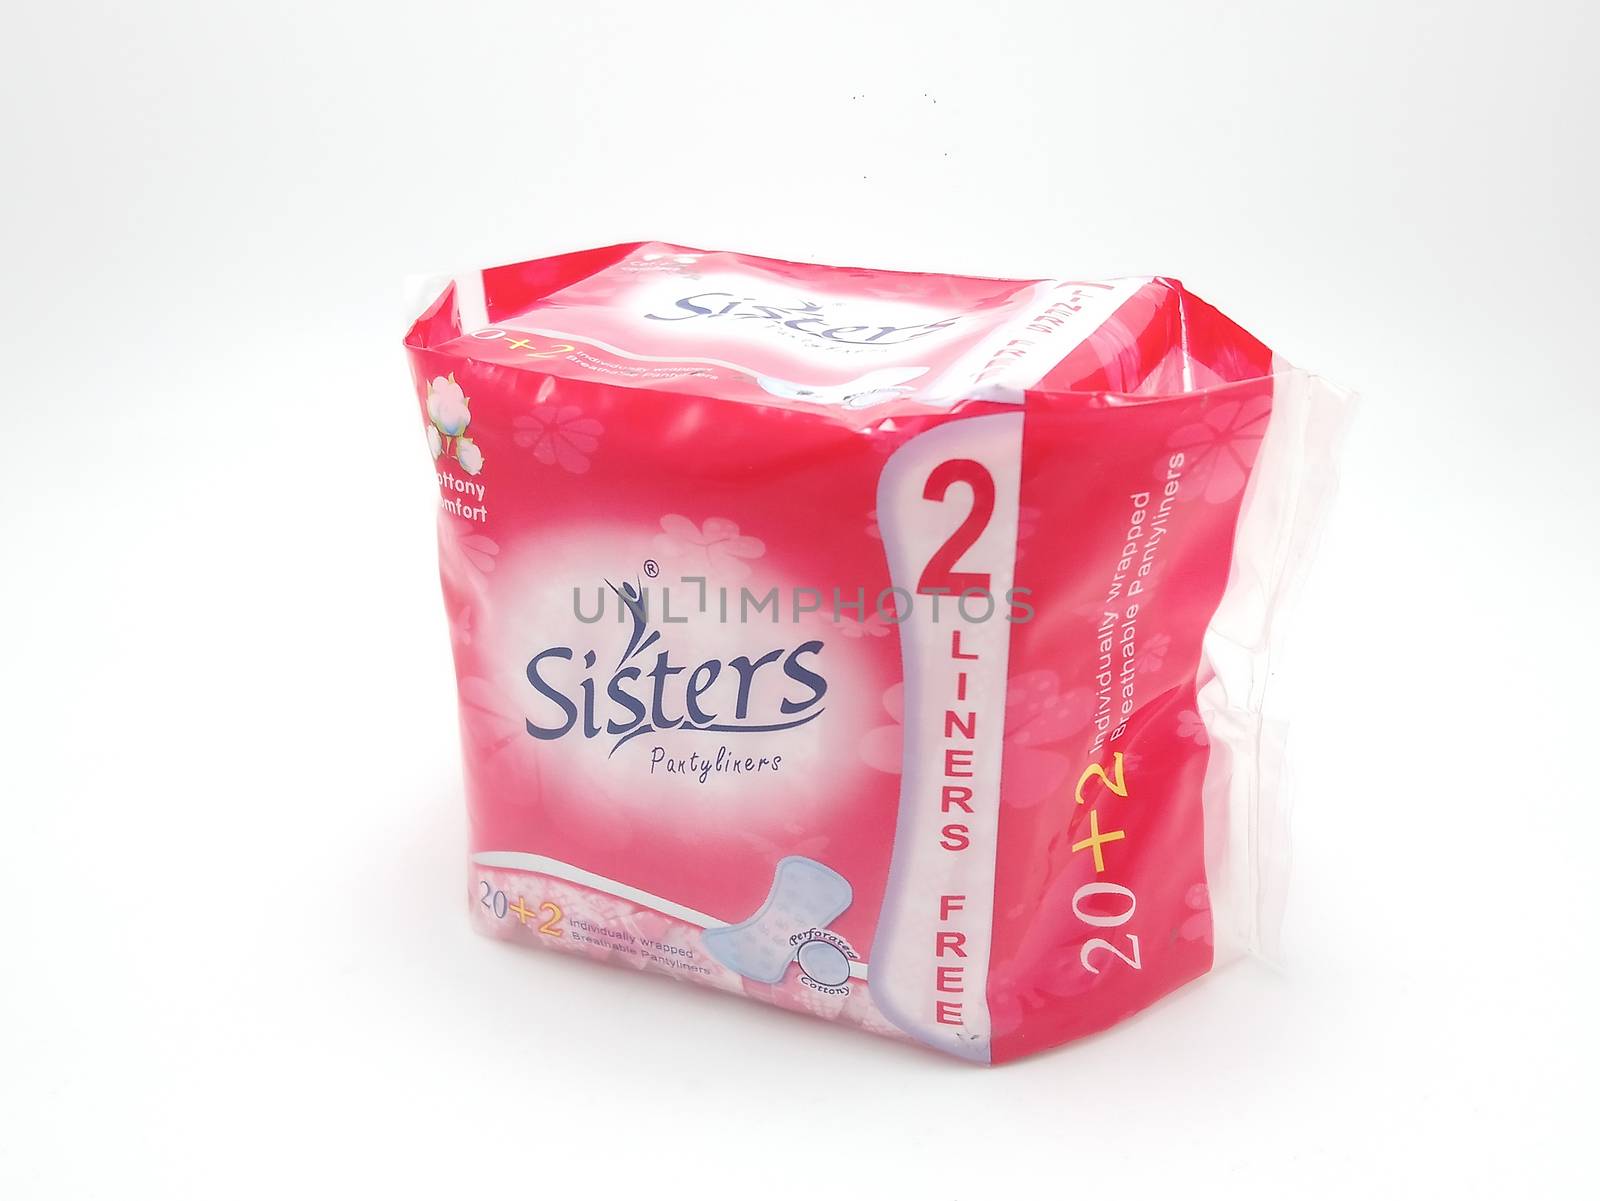 Sisters pantyliners for women in Manila, Philippines by imwaltersy